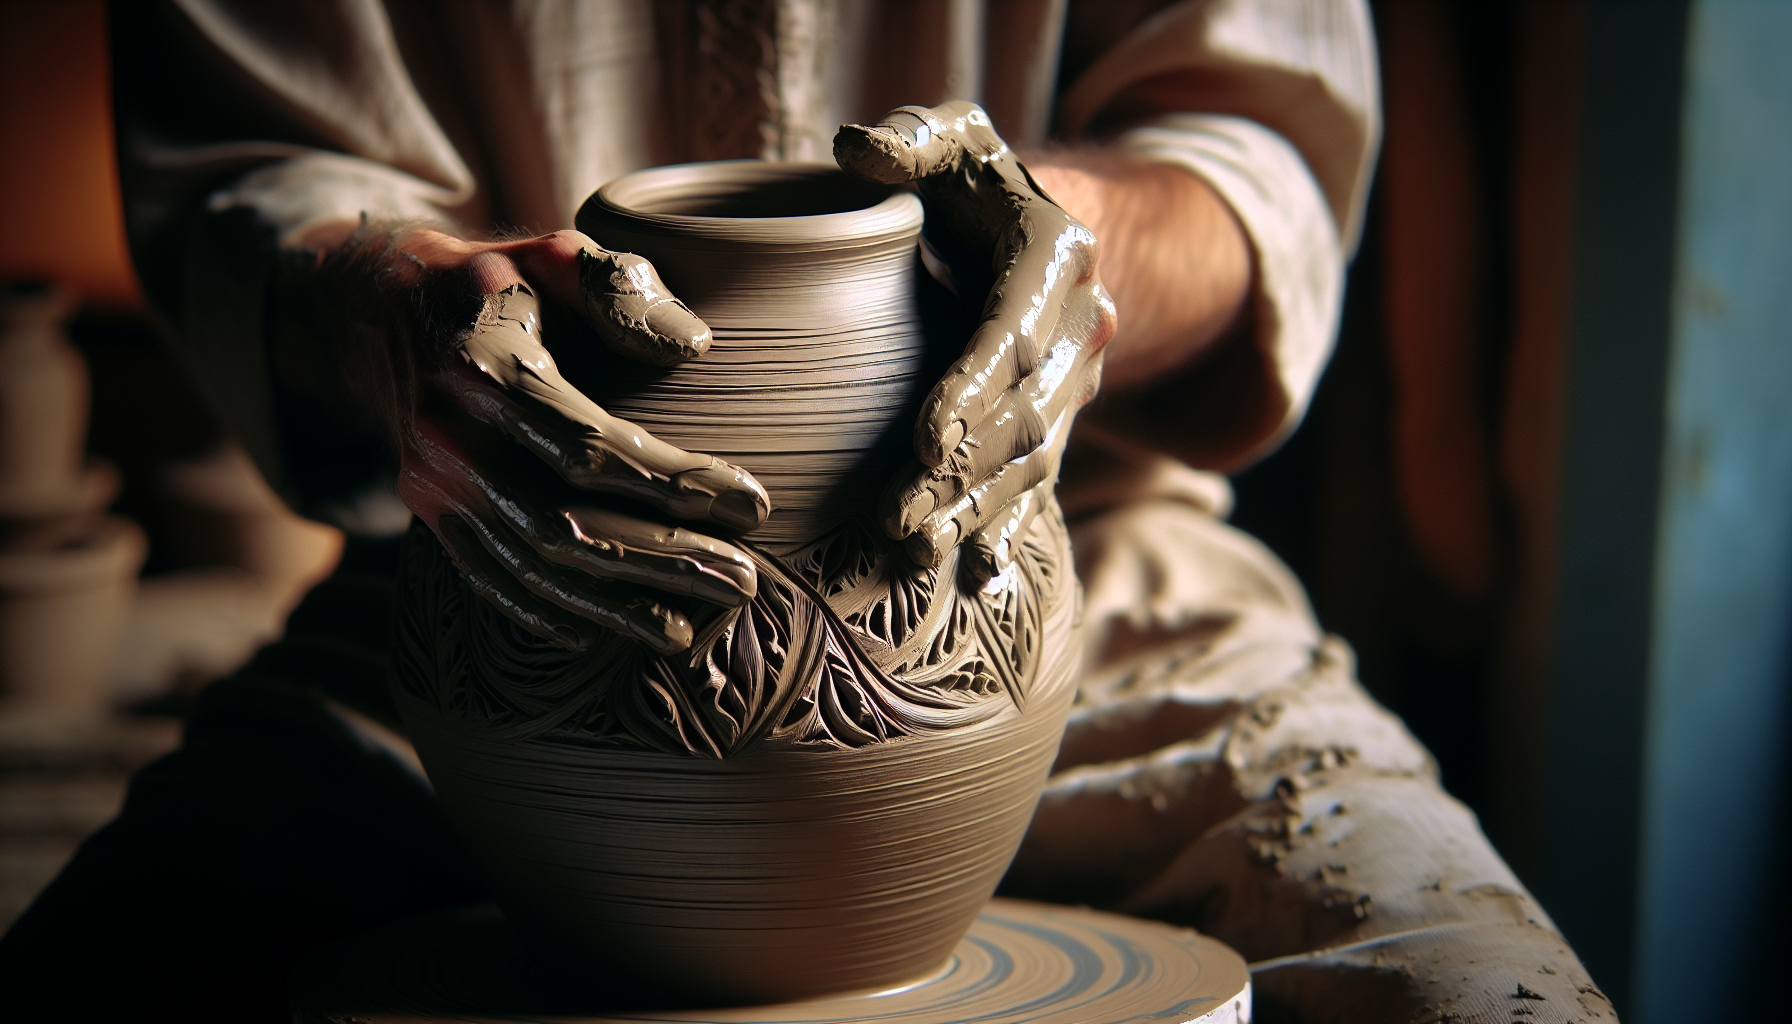 Potter's hands shaping clay